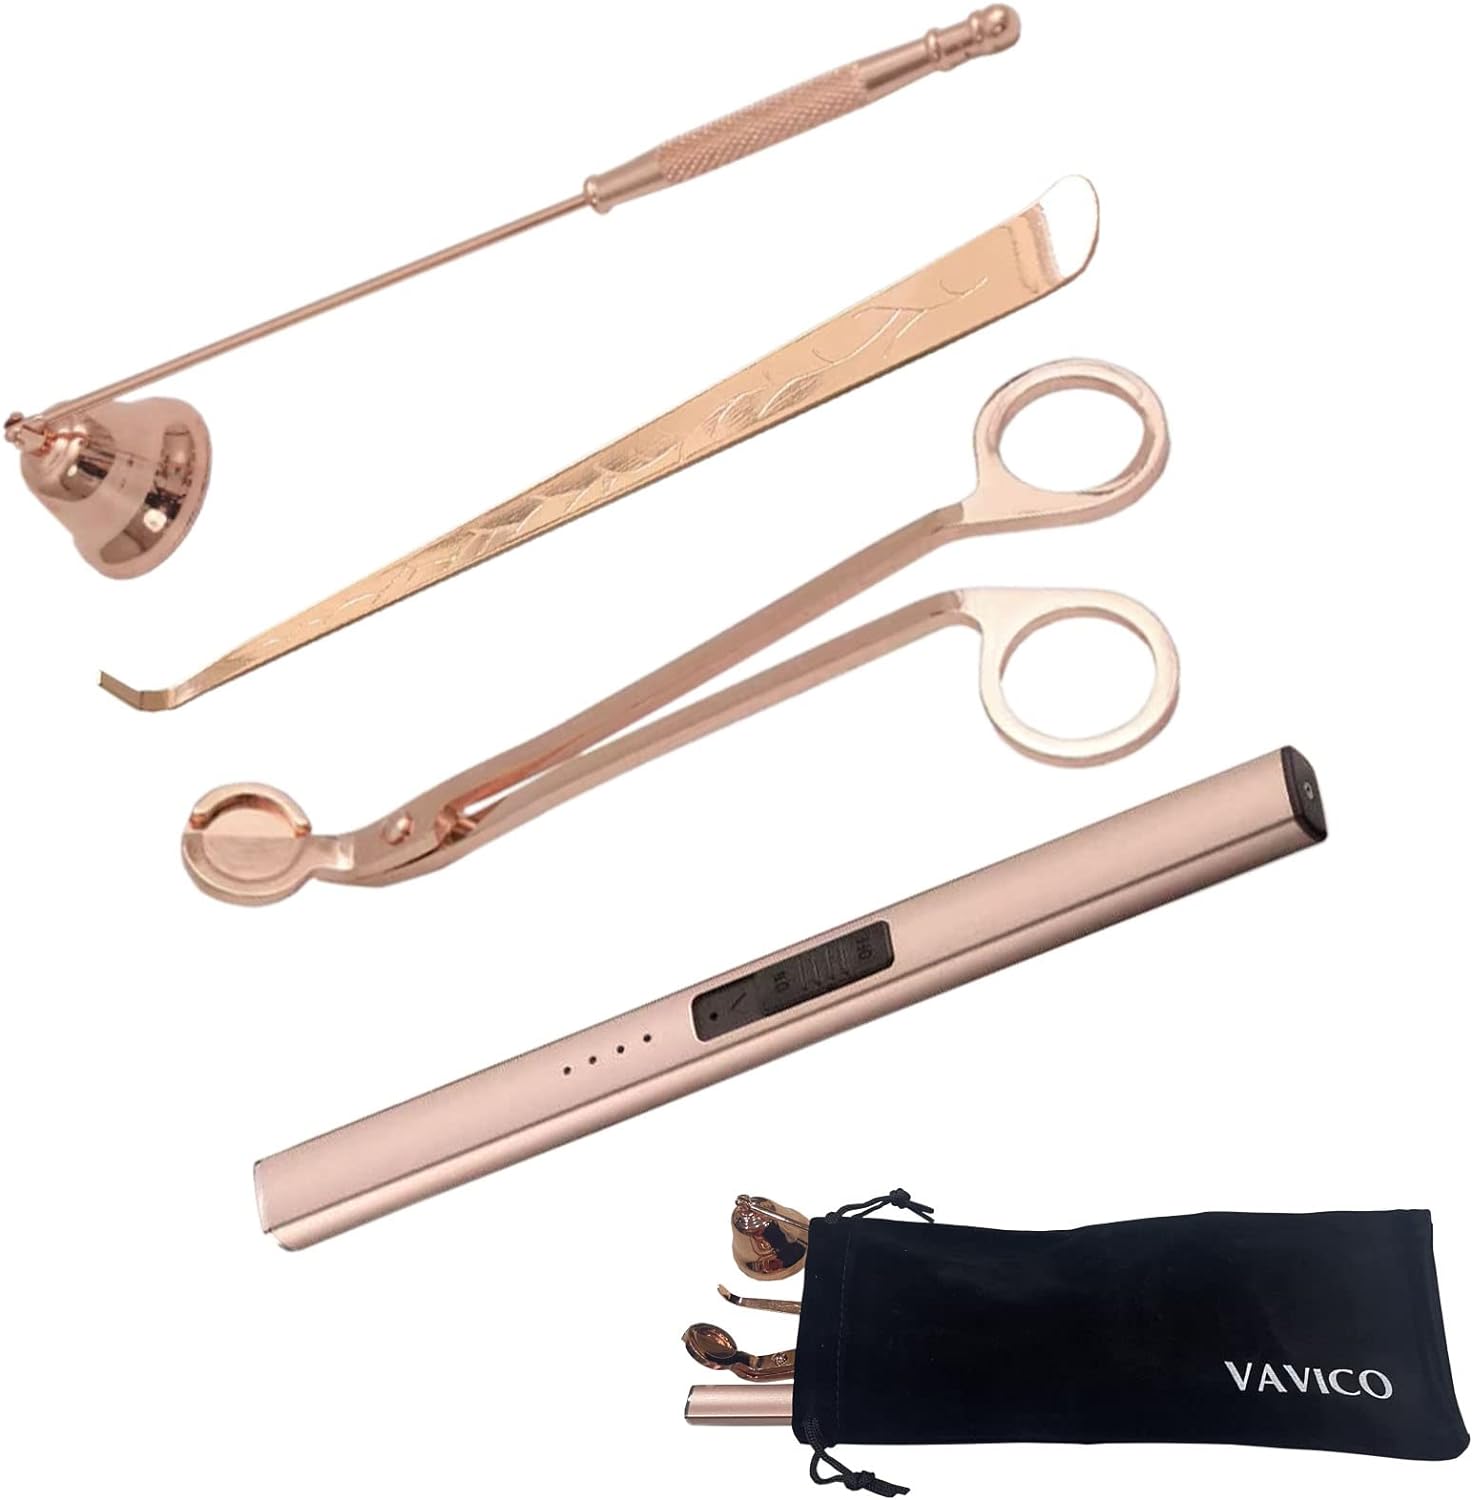 Candle Wick Trimmer Snuffer Arc Lighter Set Candle Care Kit Electric Plasma USB Rechargeable Long Windproof Lighter Candlesnuffer Candles Wicks Dipper (Rose Gold)